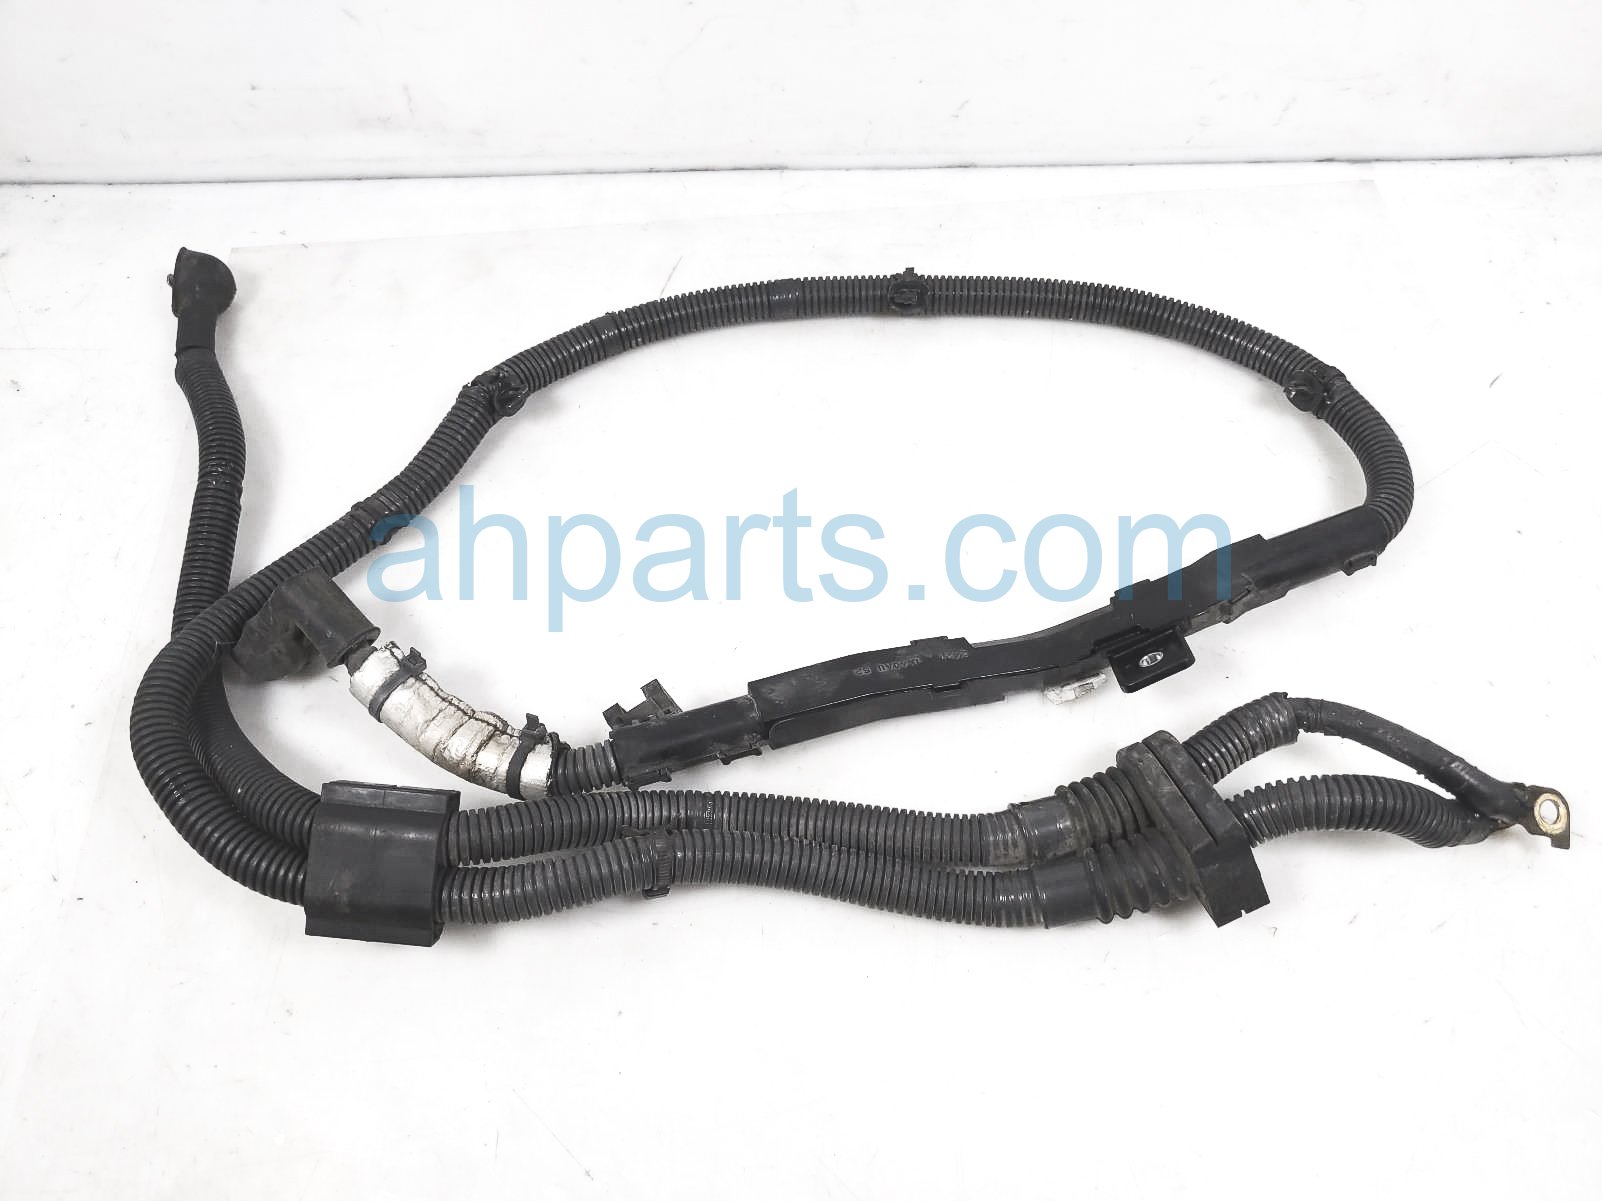 $30 Infiniti BATTERY TO STARTER CABLE - 3.7L